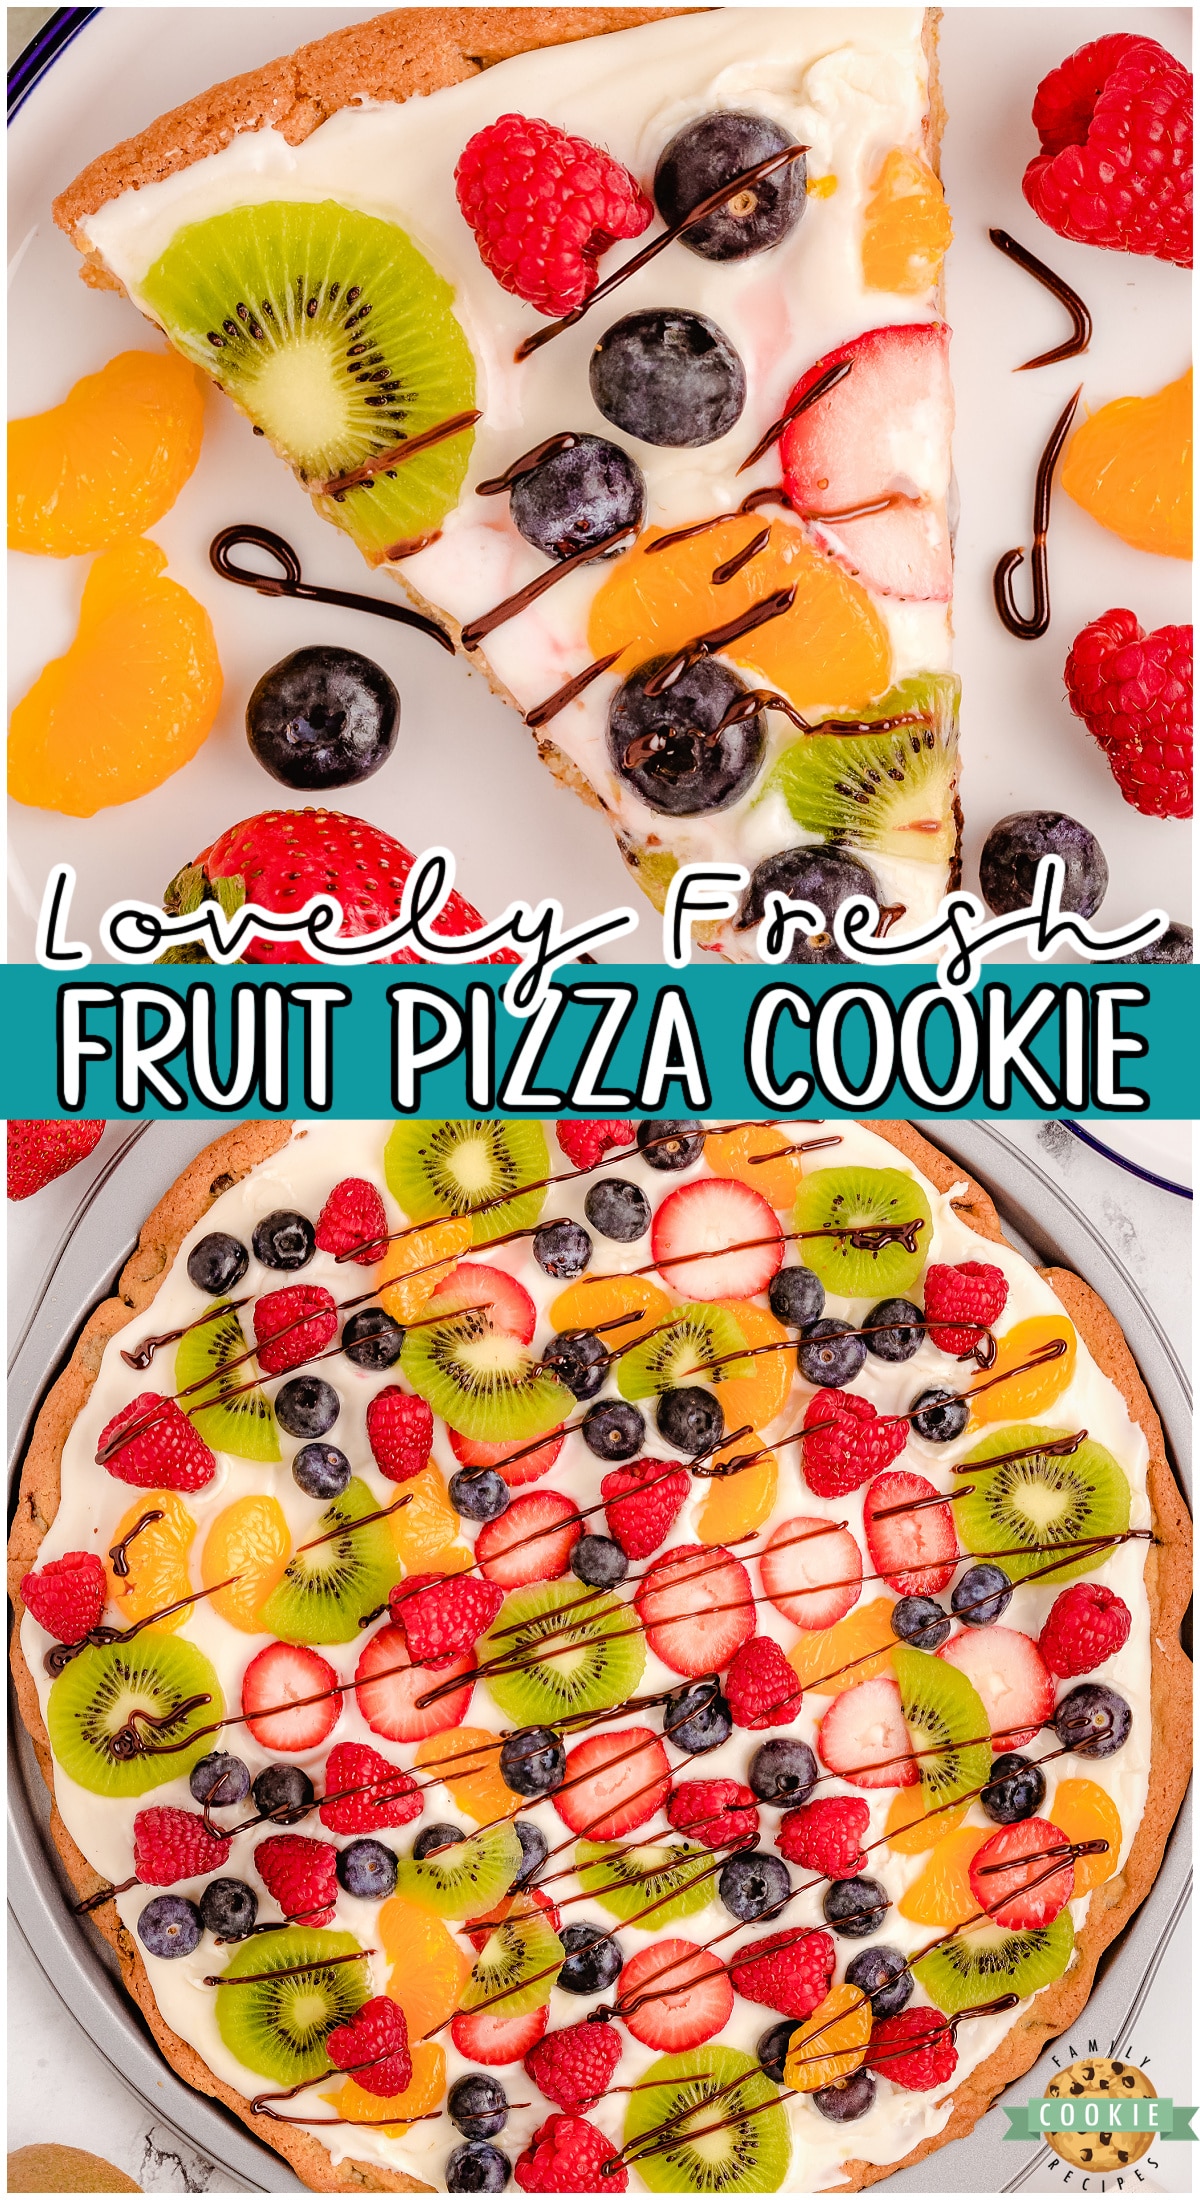 Chocolate Chip Cookie Pizza is a fabulous fruit-topped dessert pizza that's so simple to make! Chocolate Chip cookie crust topped with cream cheese frosting & fresh berries that everyone loves!